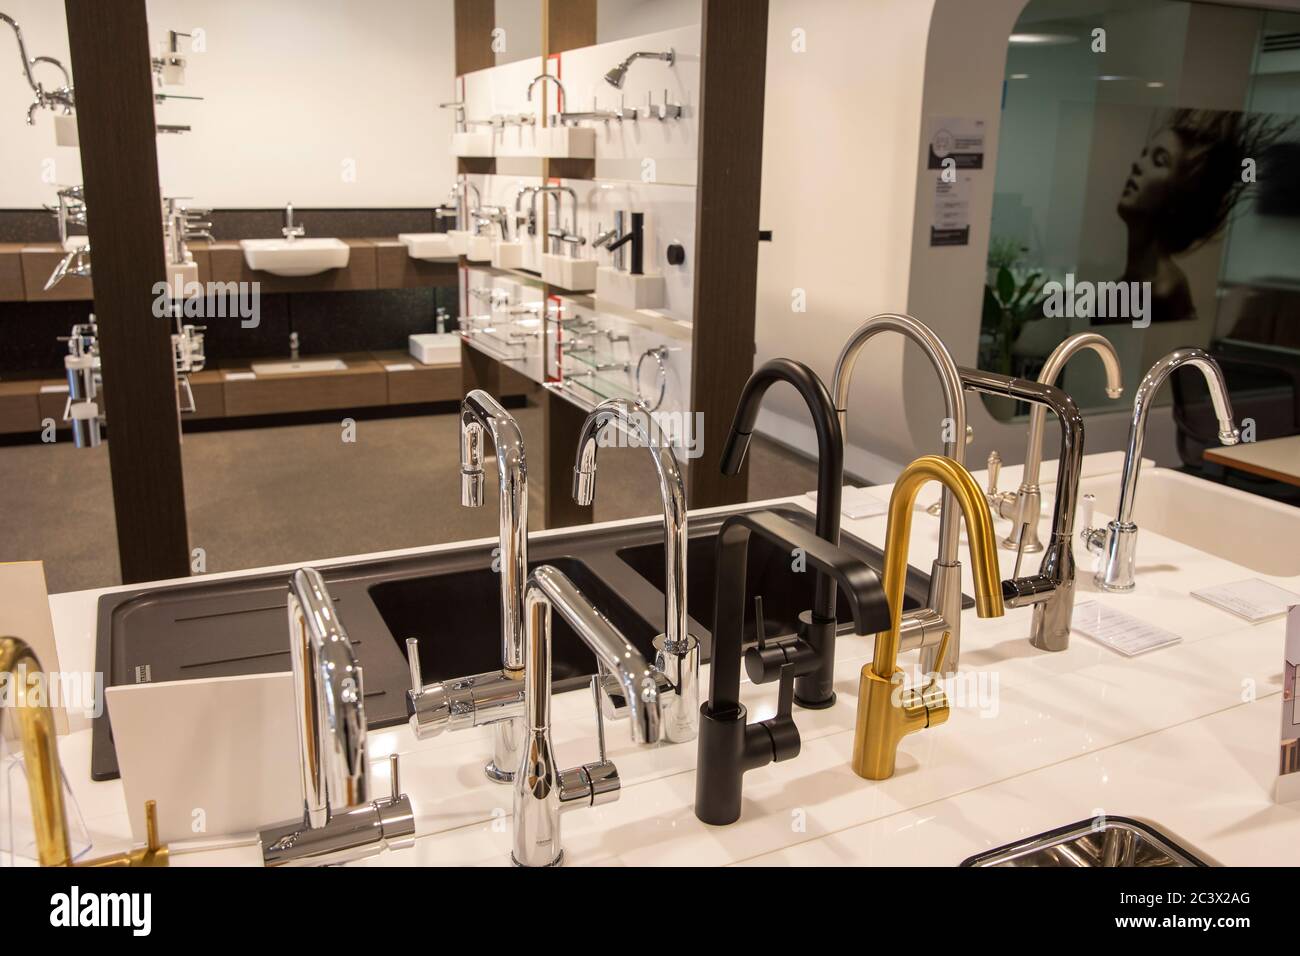 Interior shop selling kitchen and bathroom taps tap ware in Sydney Stock Photo